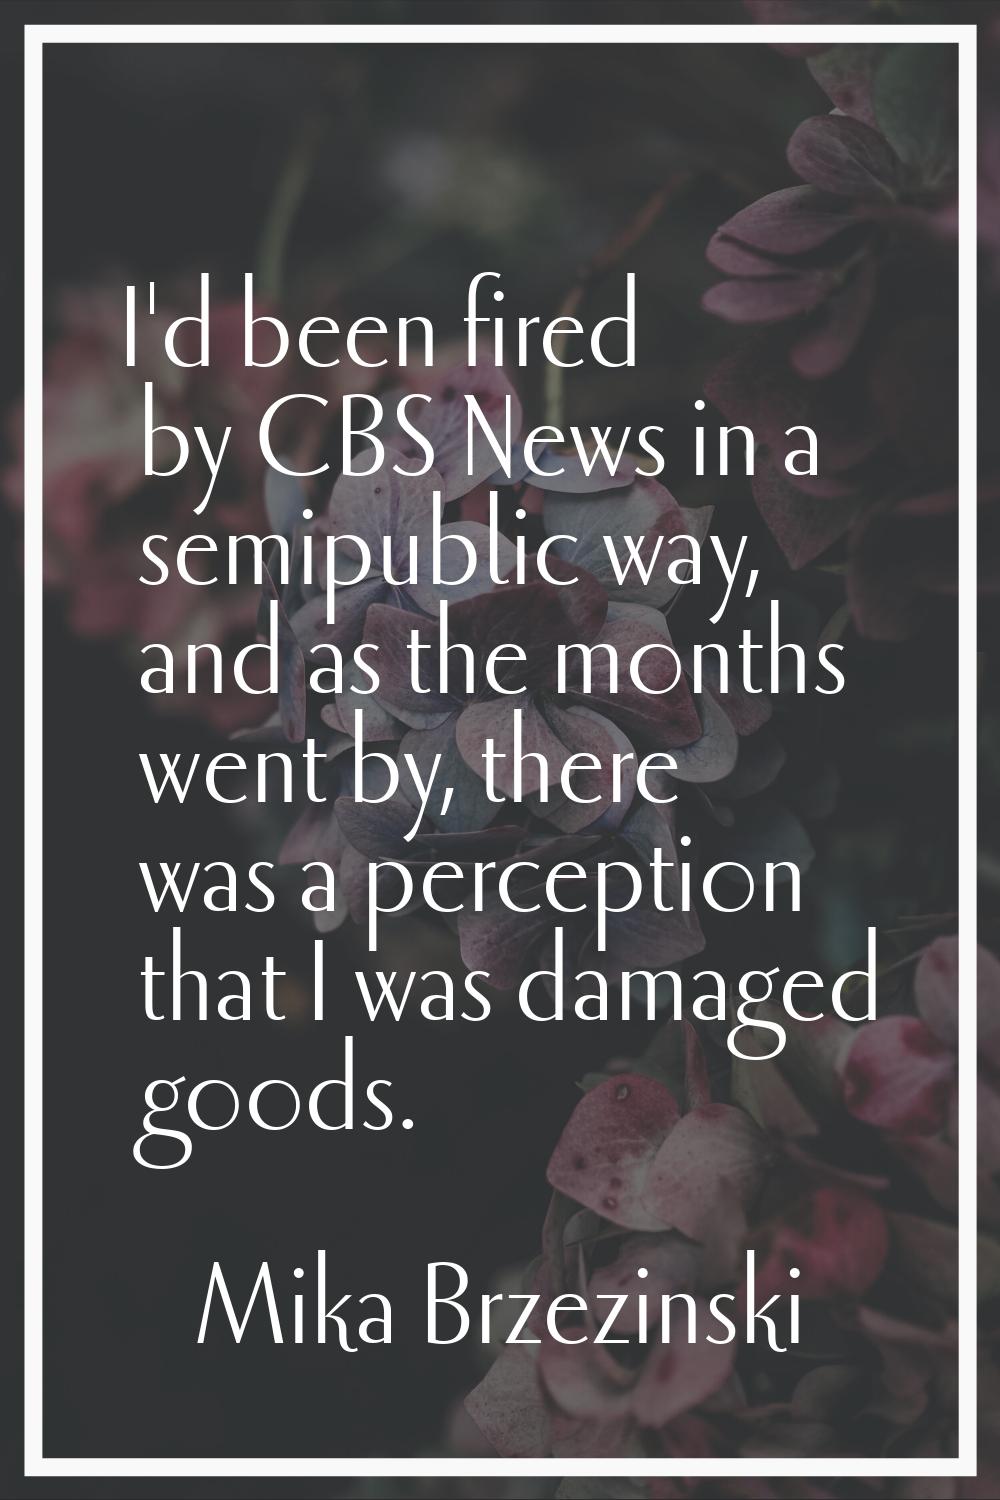 I'd been fired by CBS News in a semipublic way, and as the months went by, there was a perception t